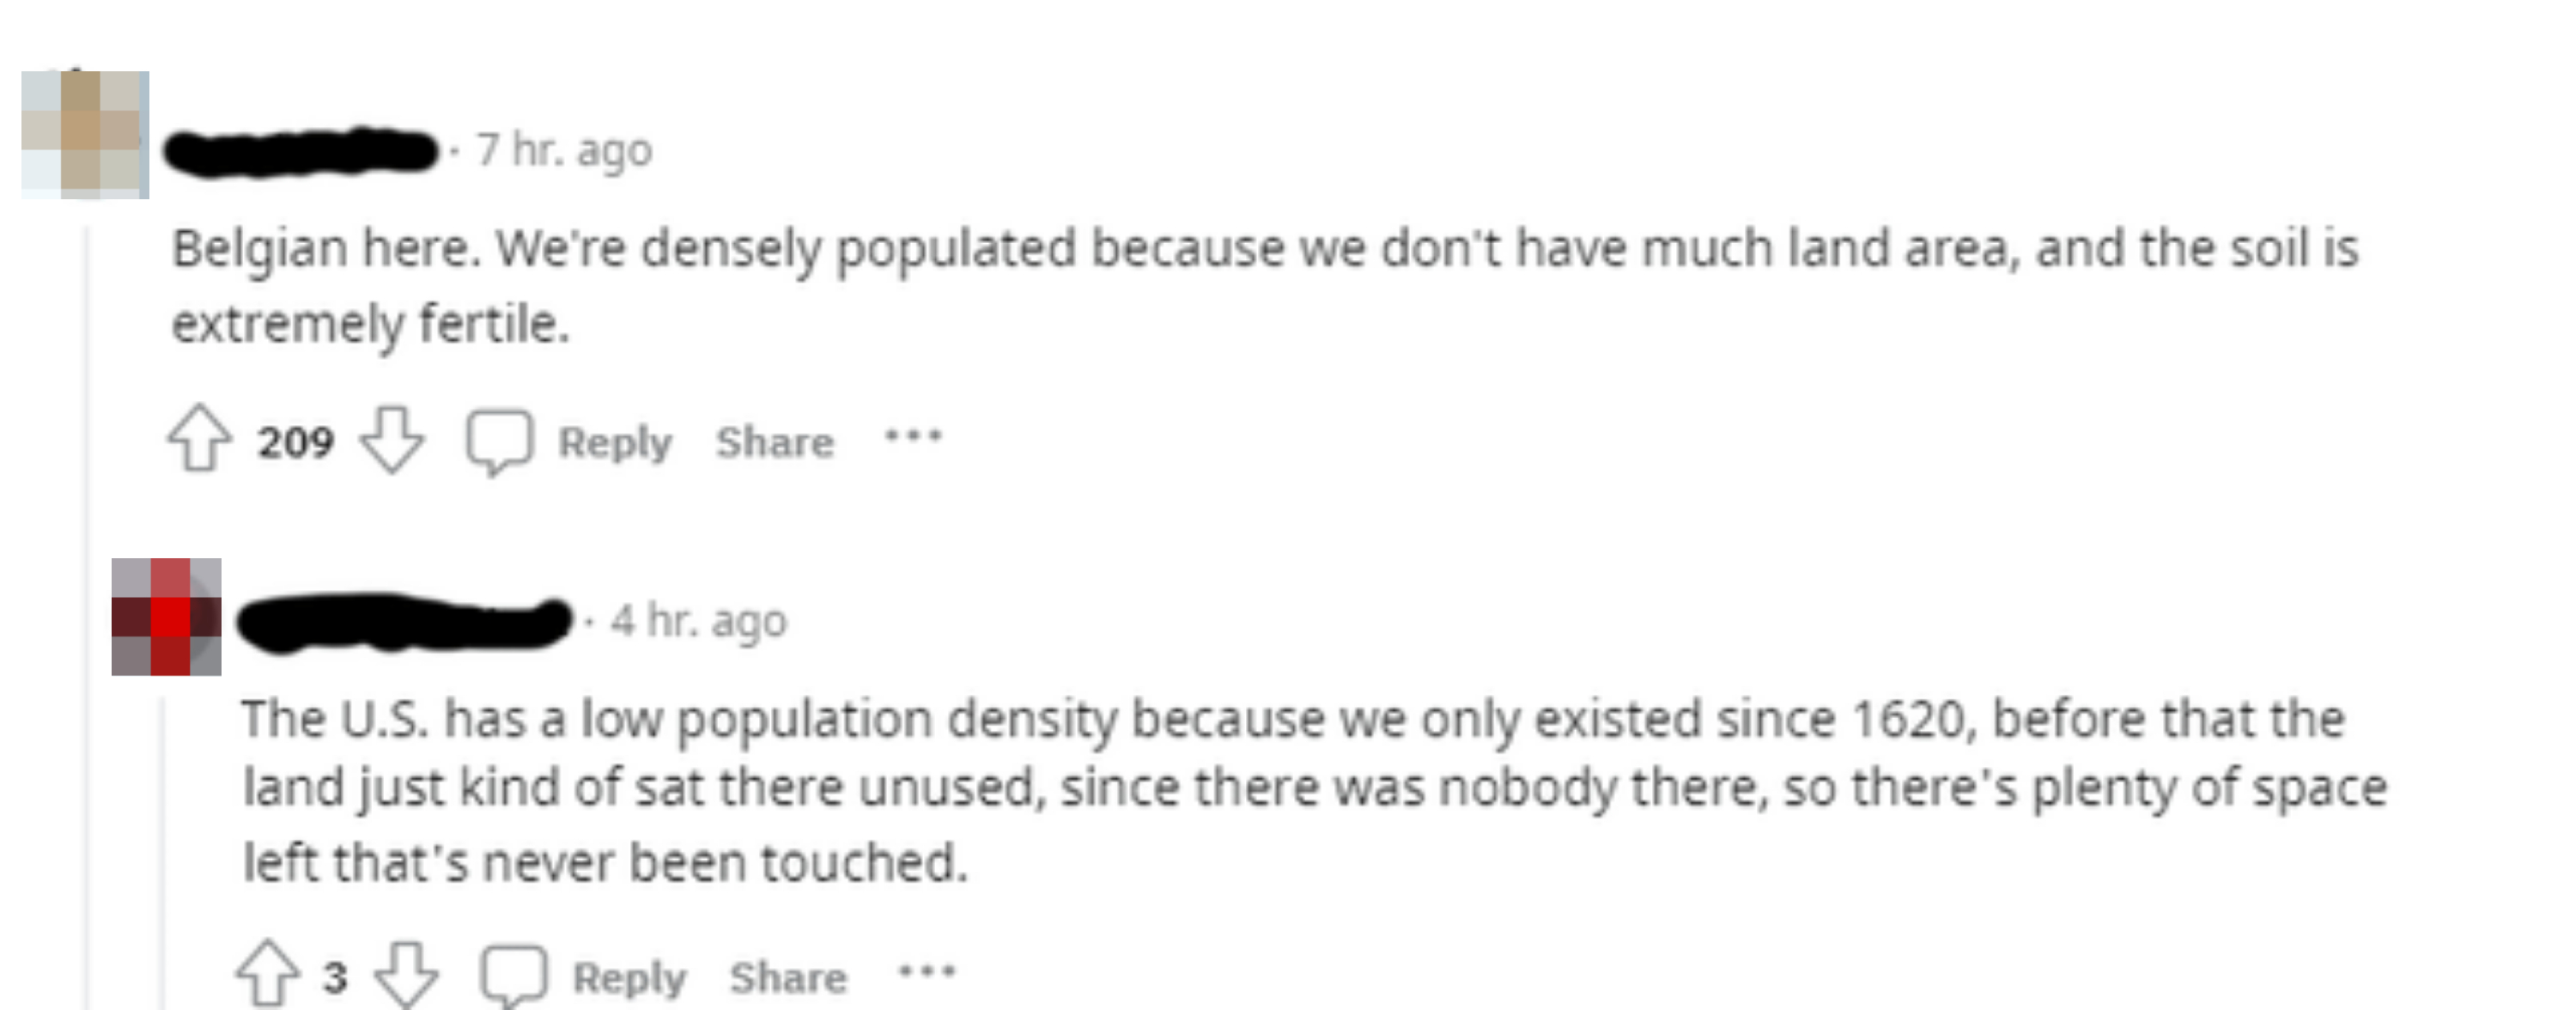 A comment saying that the US has a low population density because &quot;we only existed since 1620, before that the land just kind of sat there unused, since there was nobody there&quot;